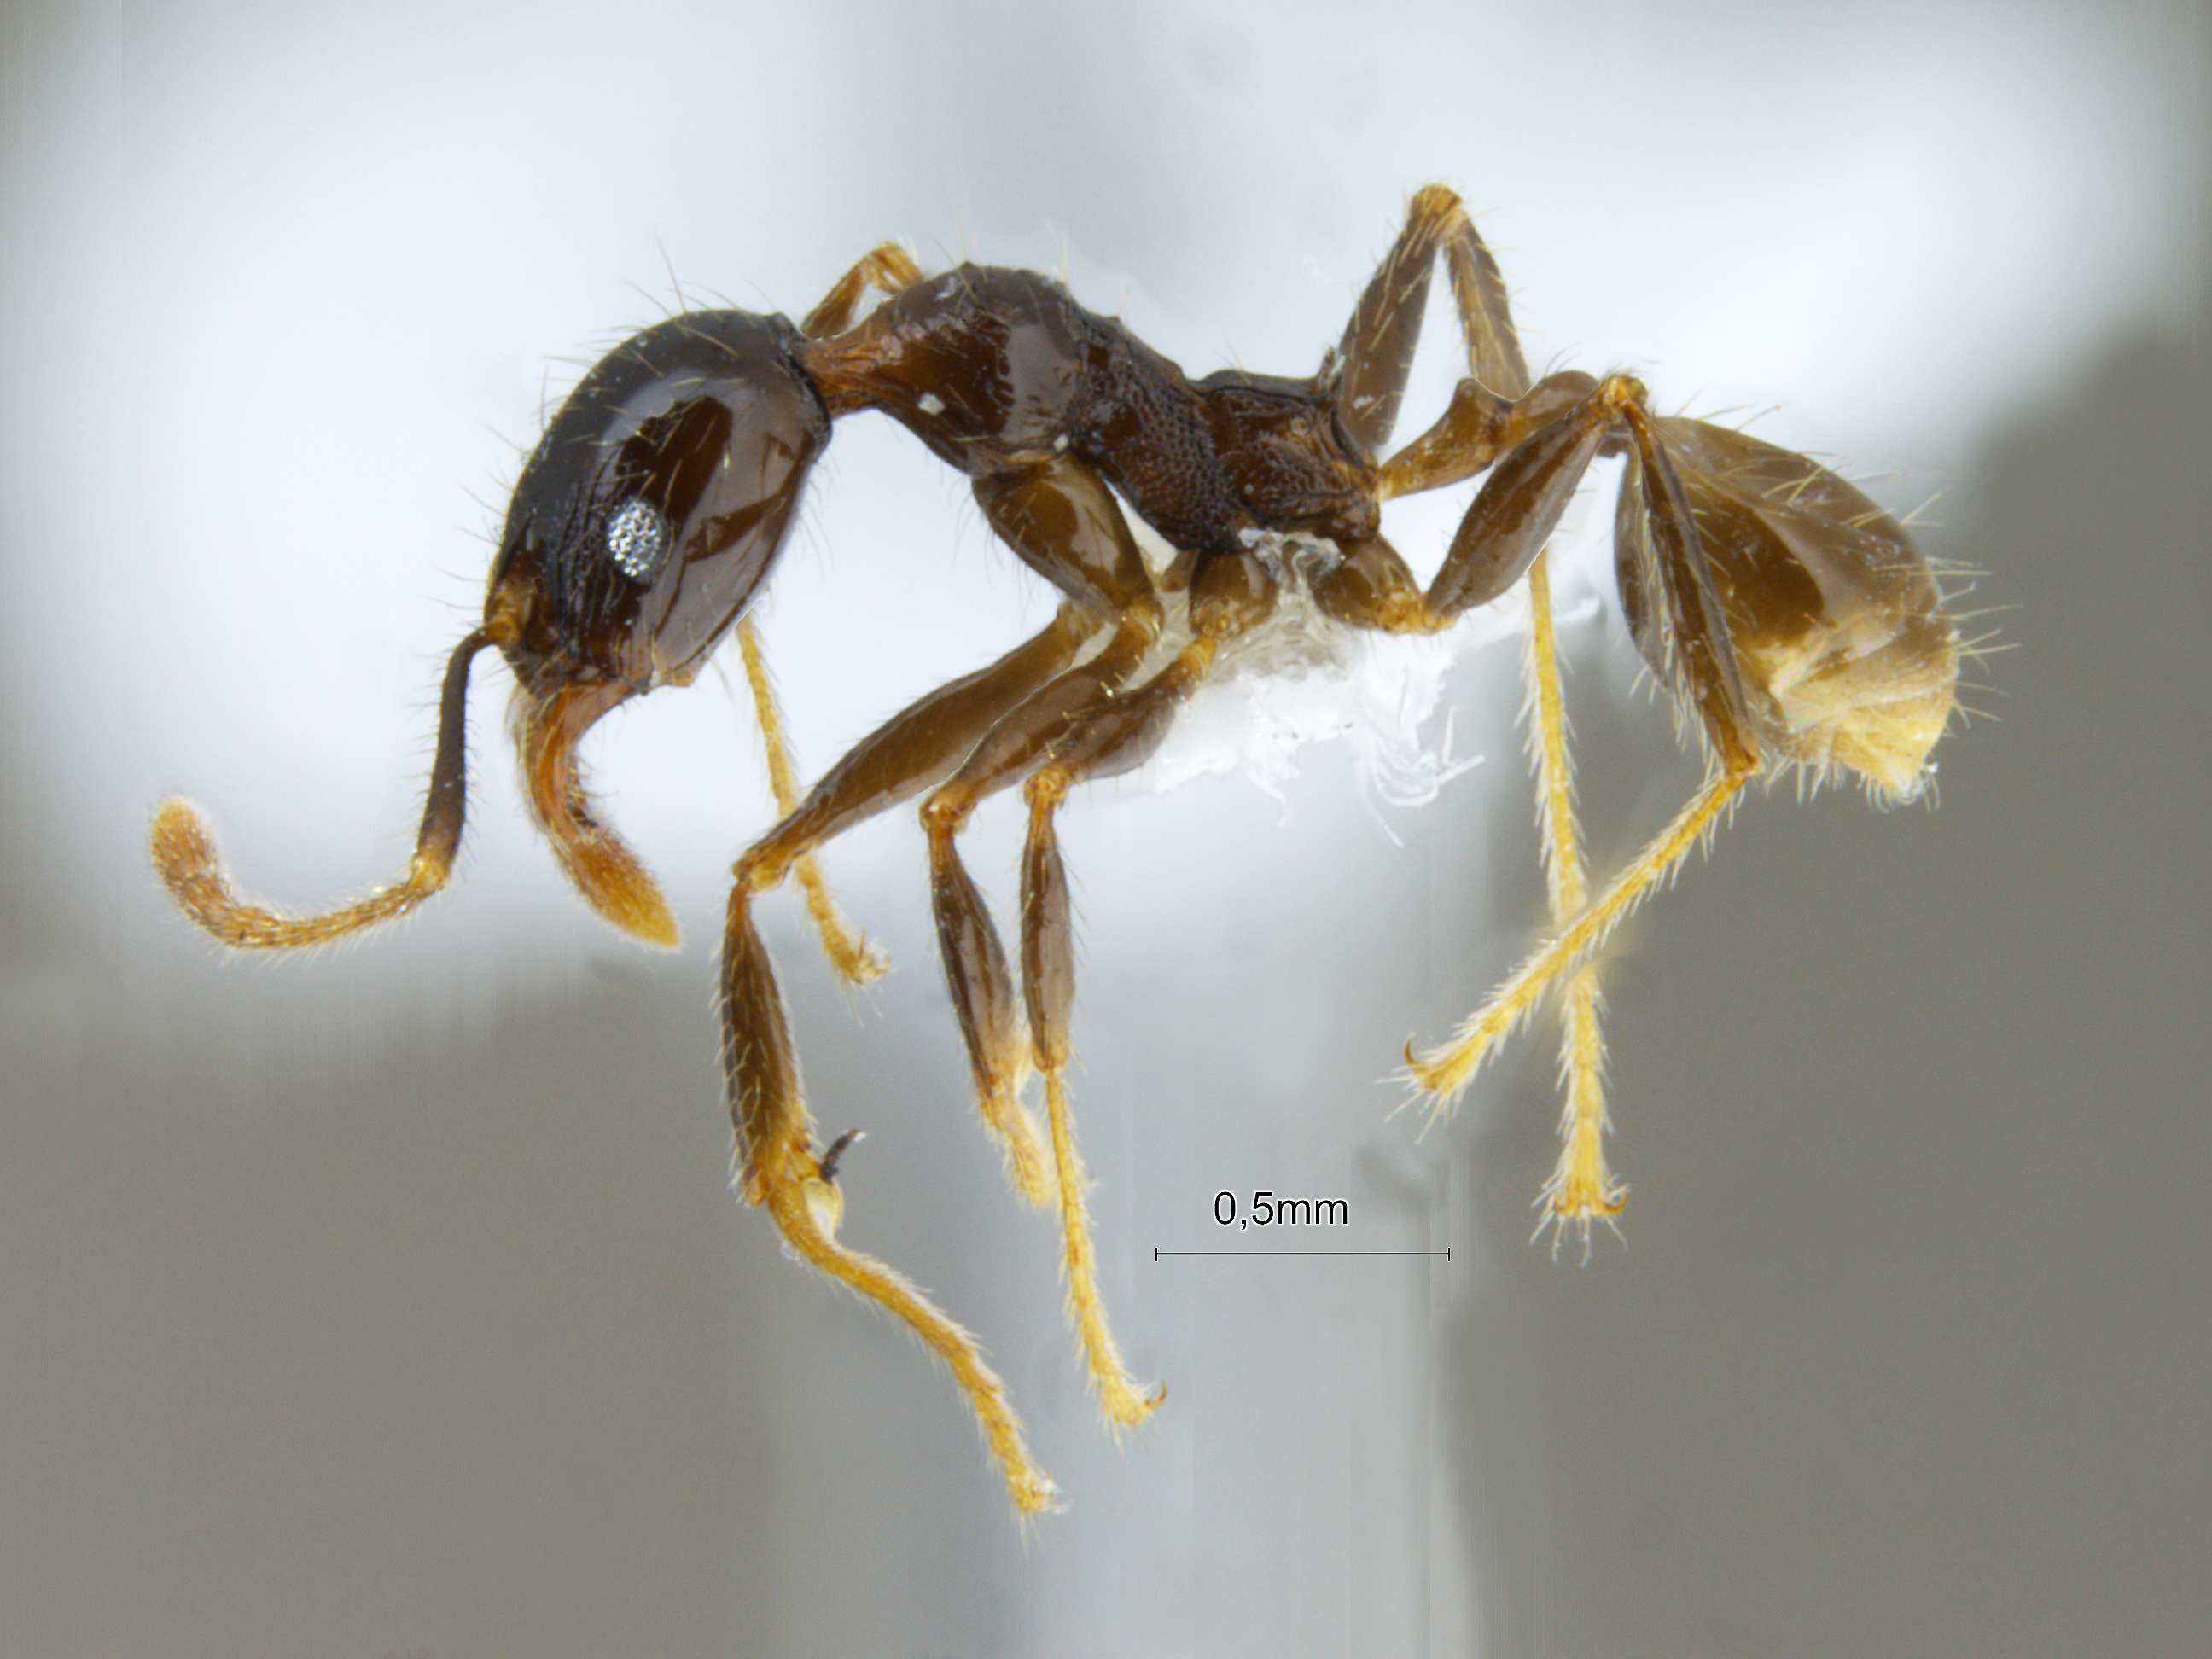 Pheidole submonticula lateral